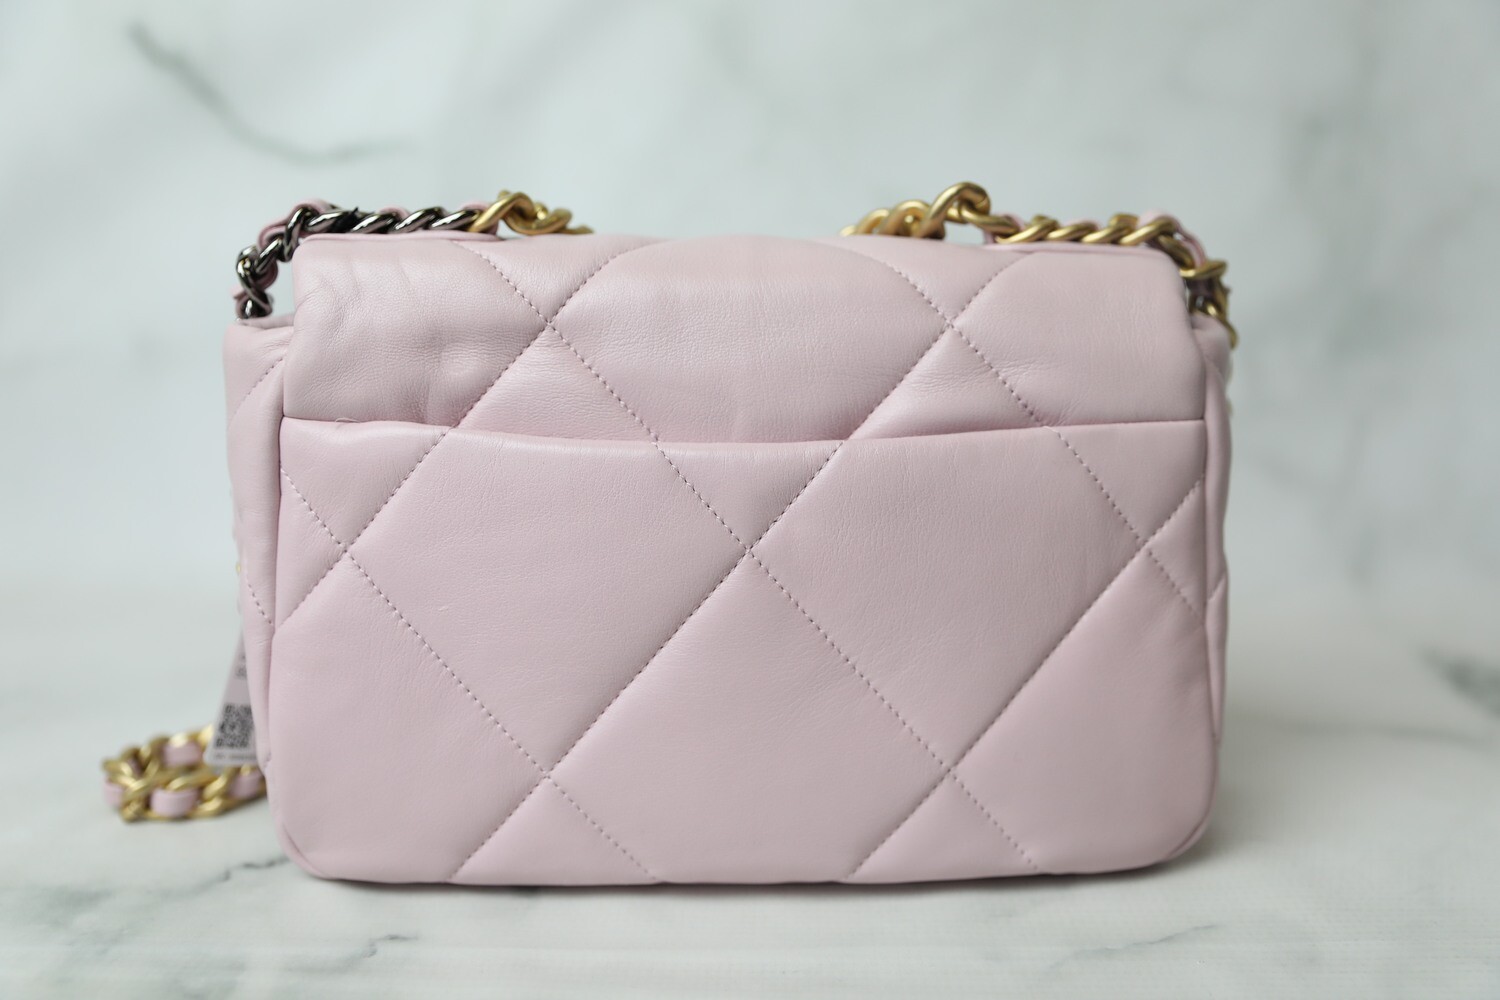 Chanel 19 Small, 21S Pink Leather, New in Box MA001